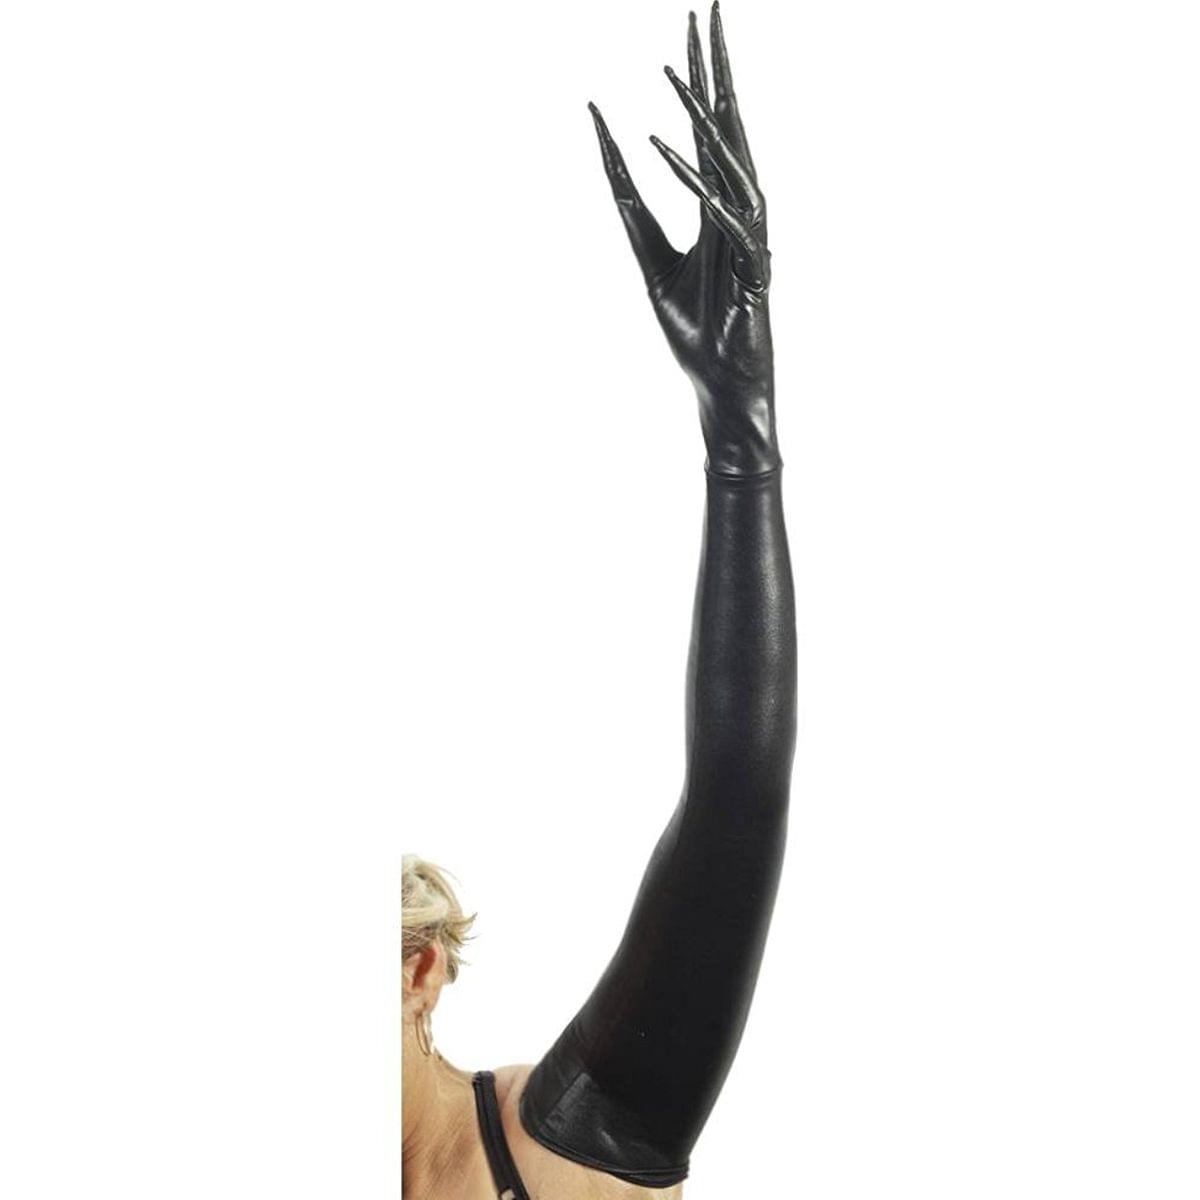 Long Pointed Fingered Gloves Adult Costume Accessory